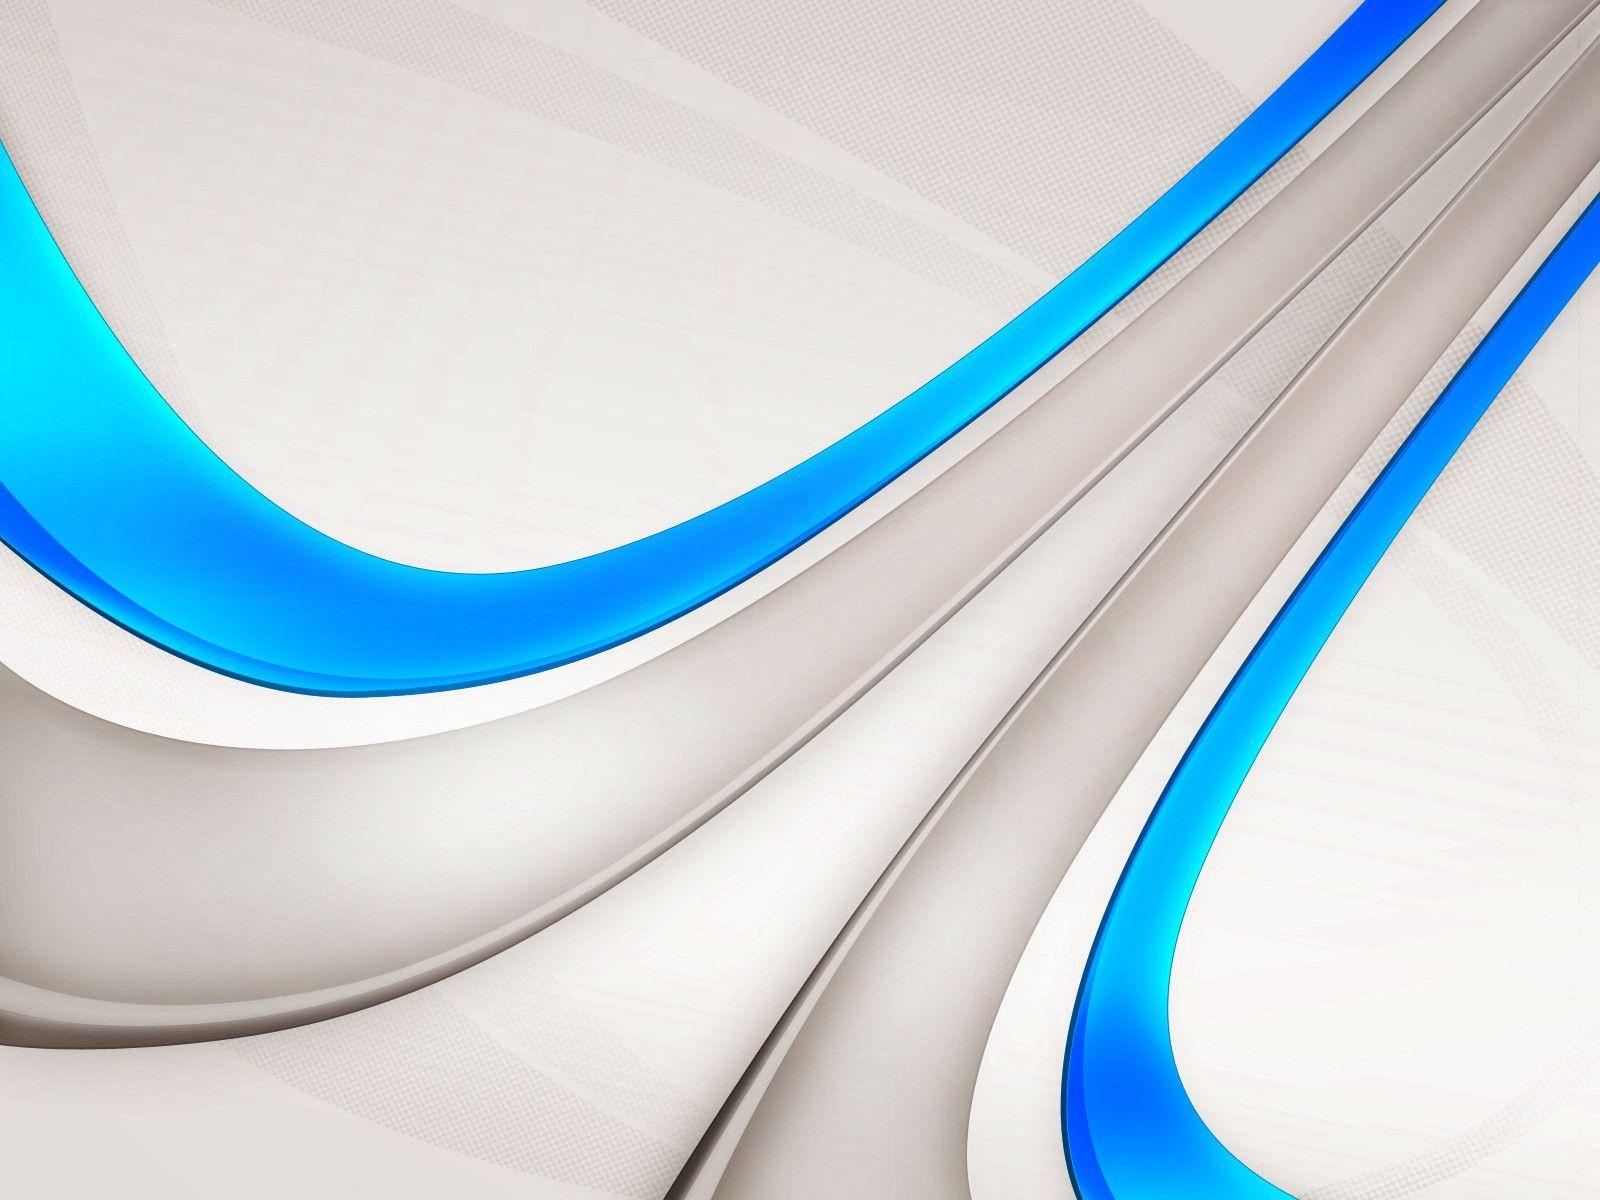 Wallpaper For > Blue And White Abstract Wallpaper